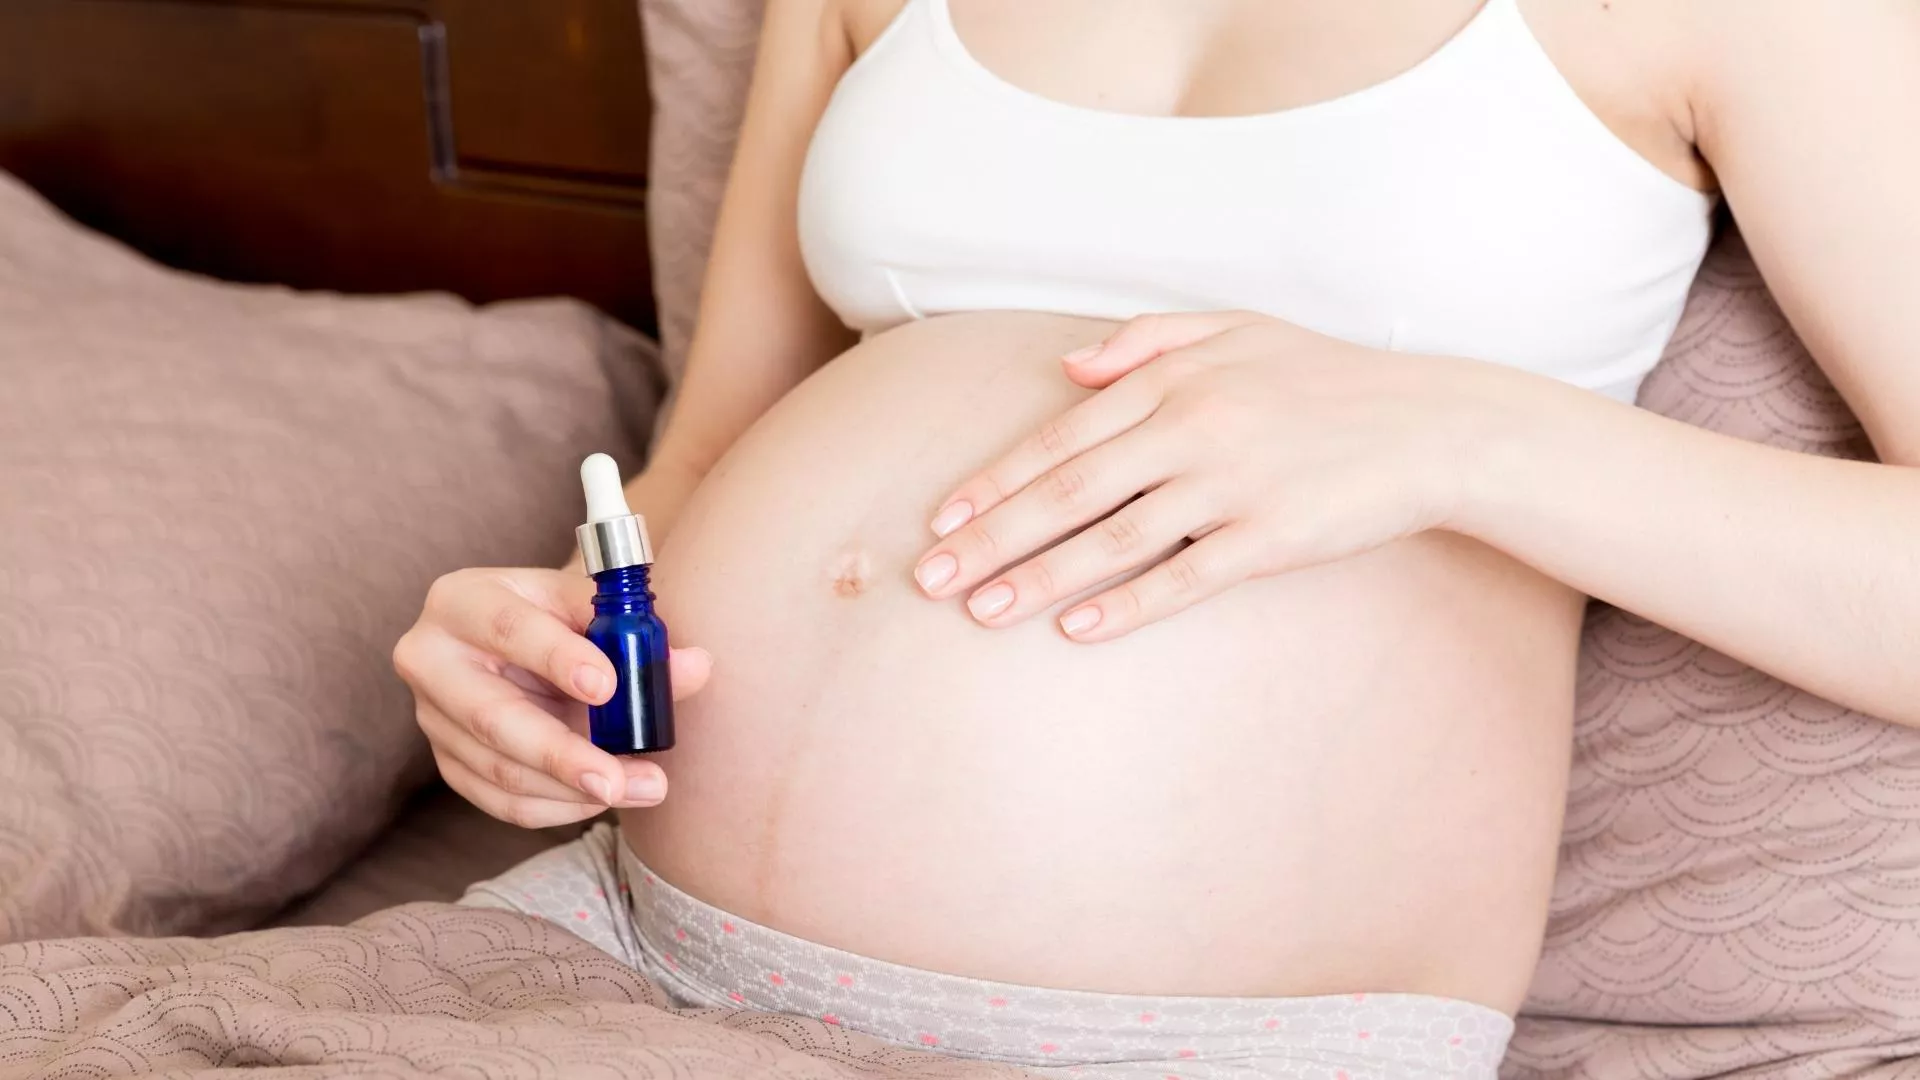 What should be done to avoid stretch marks during pregnancy?